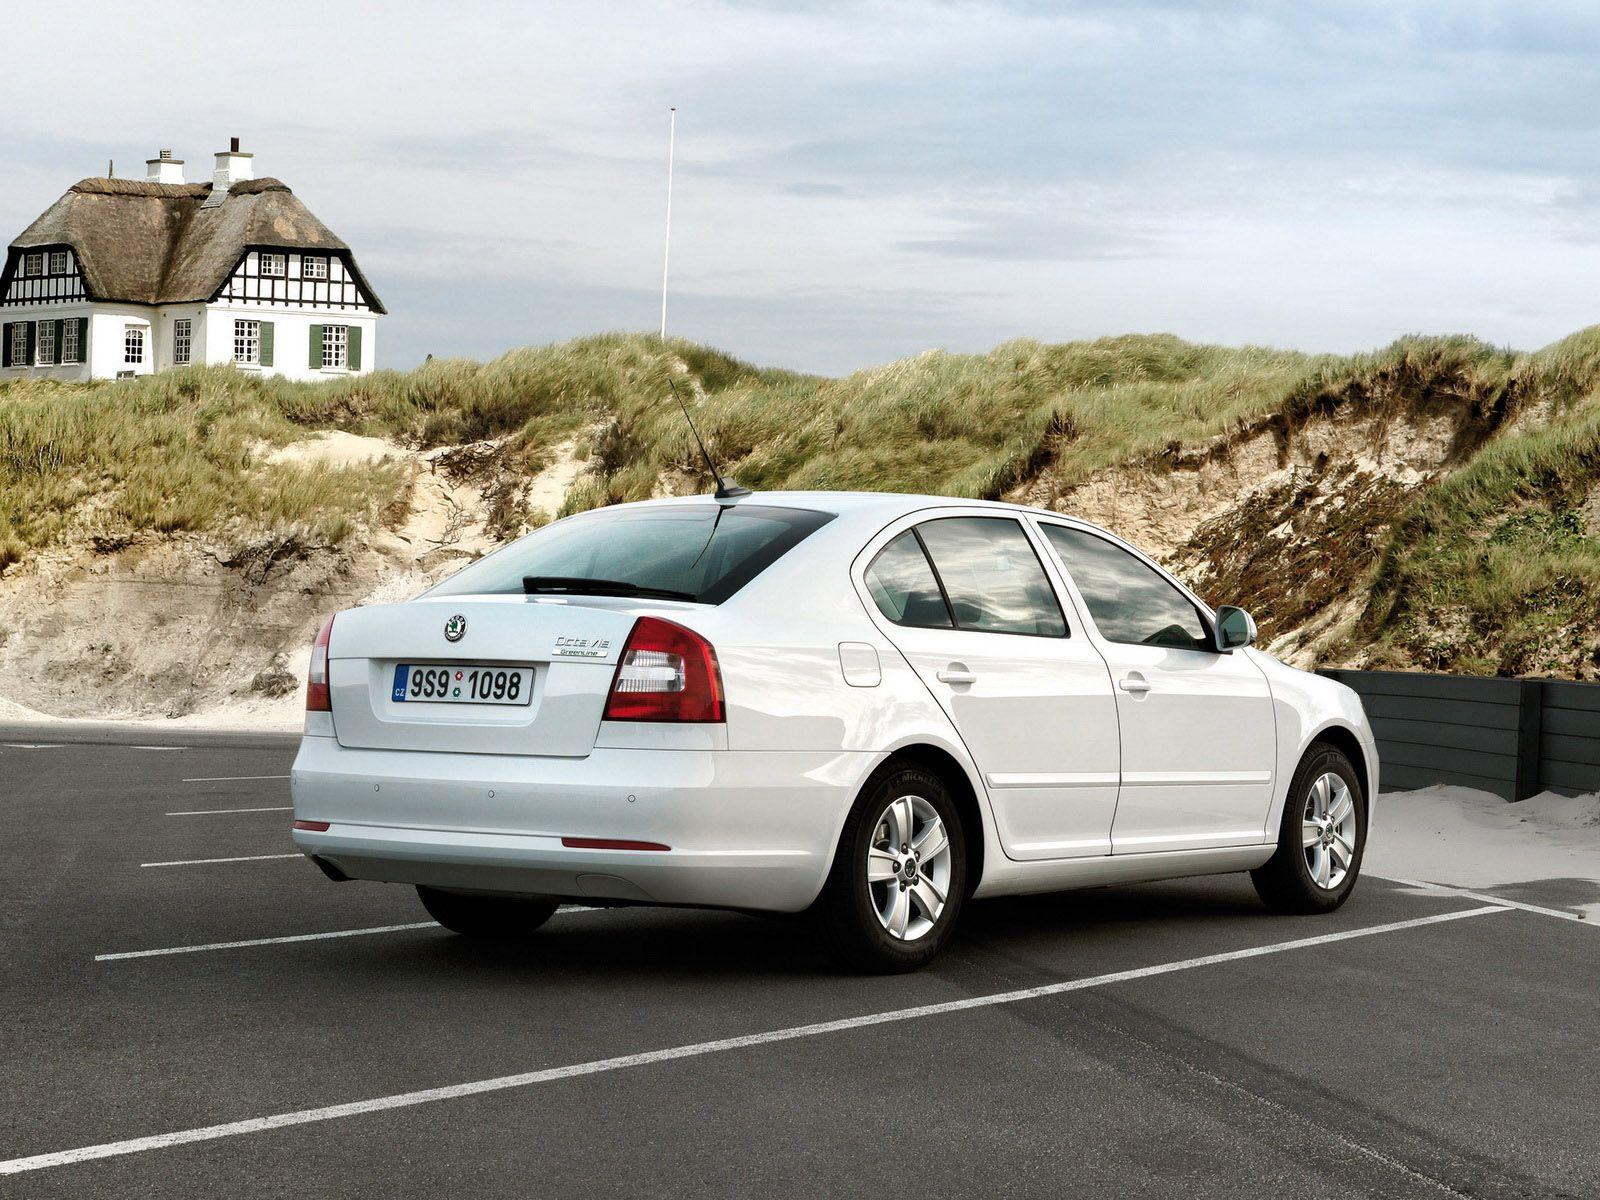 Skoda Octavia wallpaper and image, picture, photo